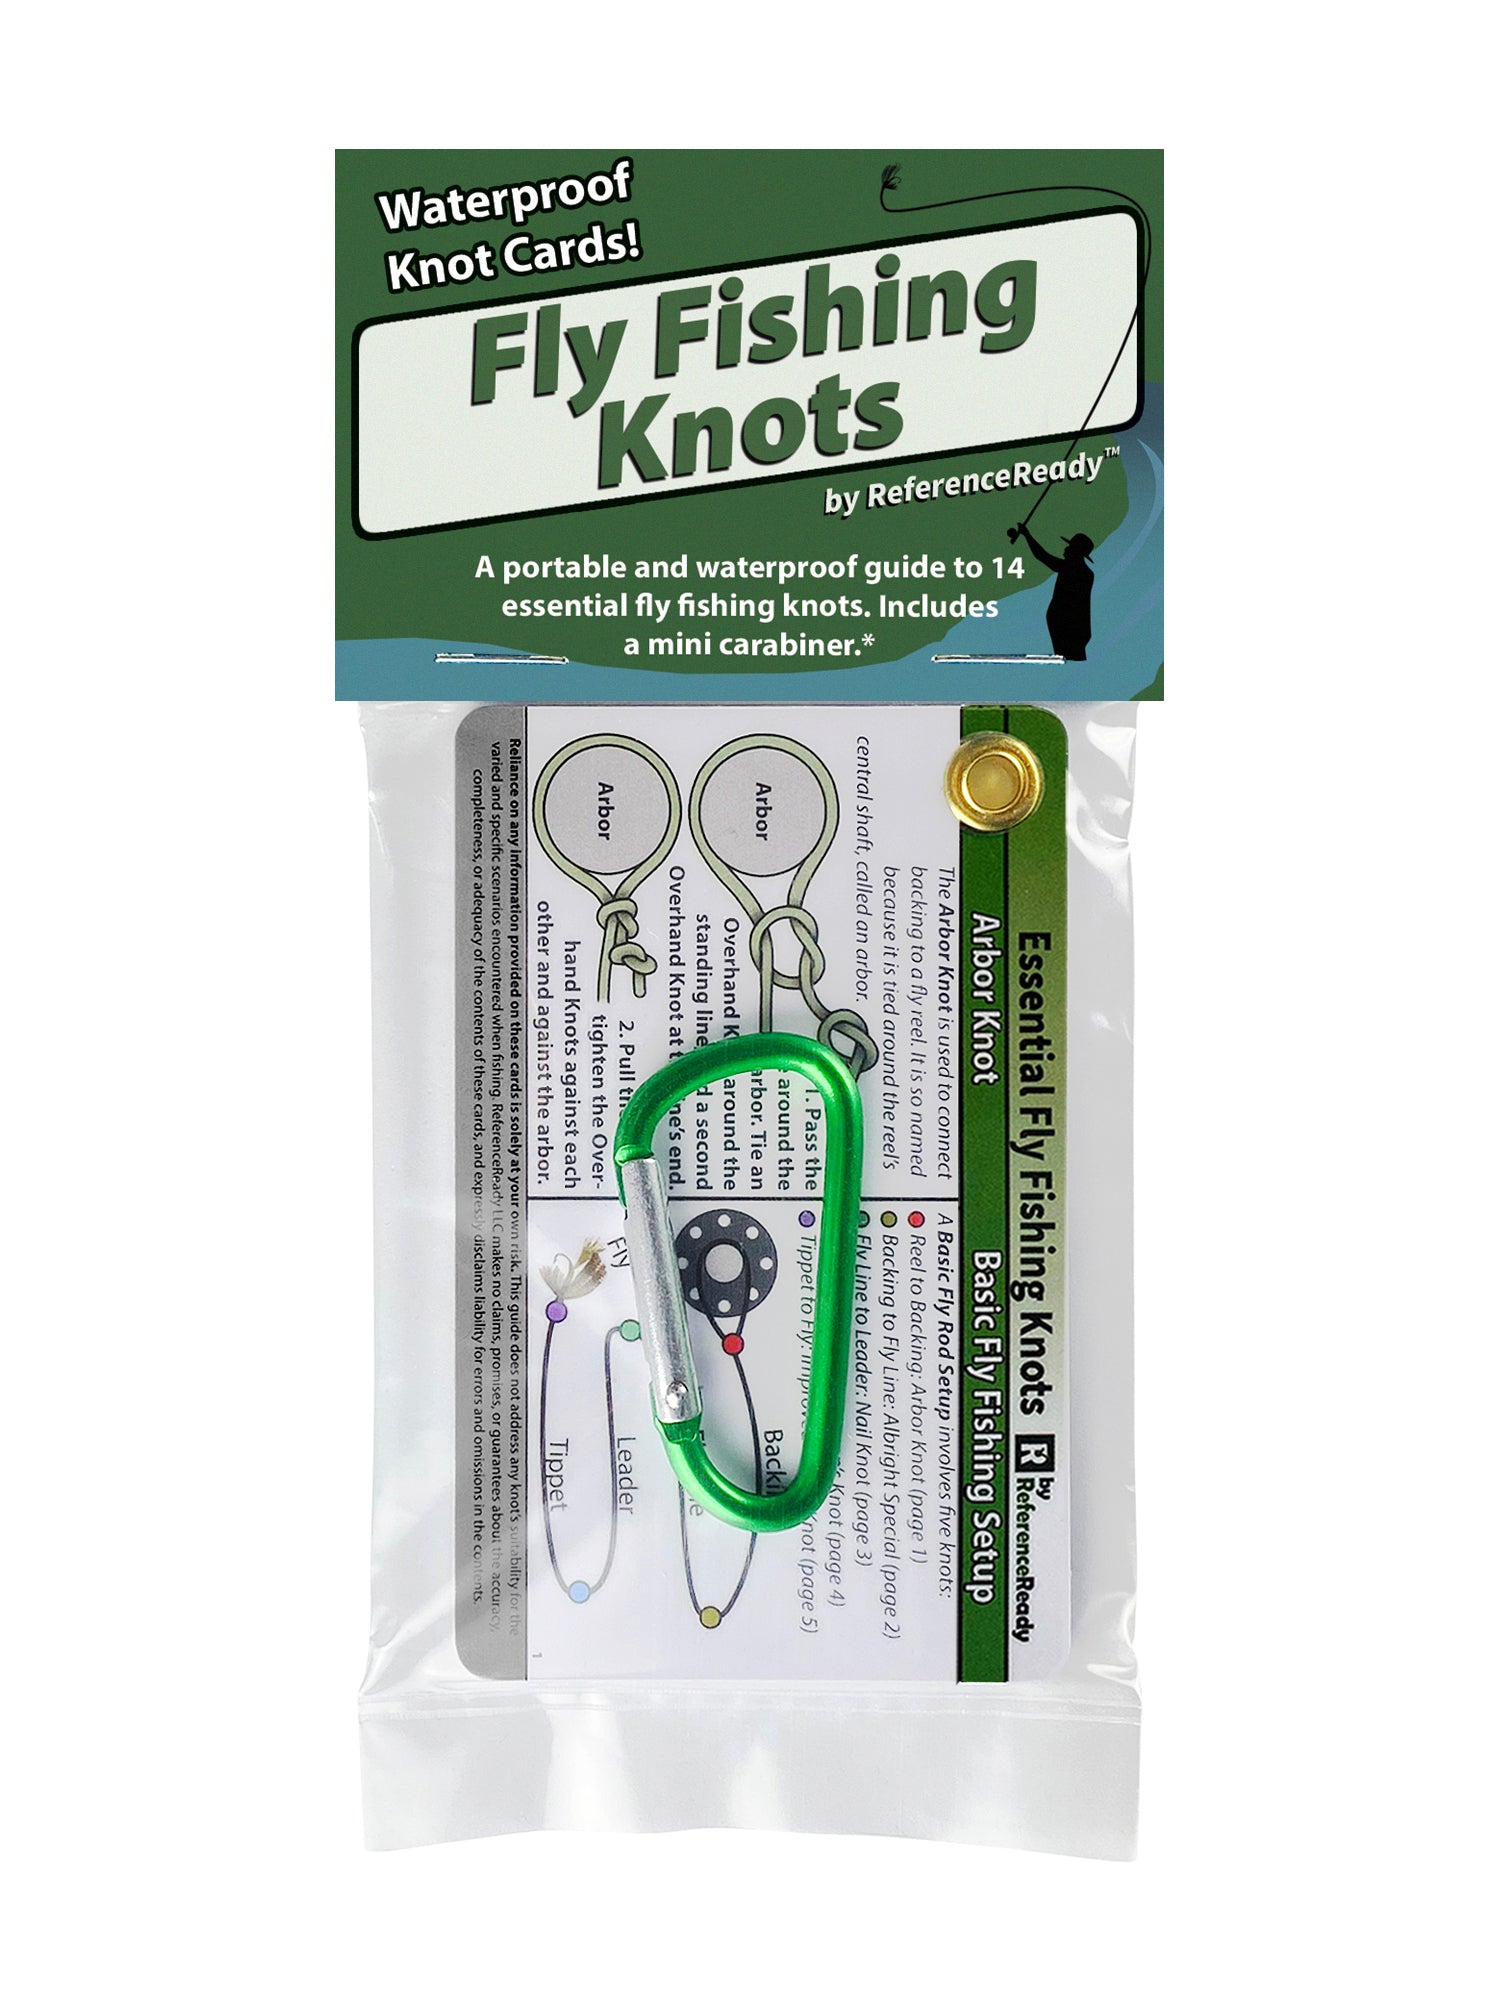 Essential Fly Fishing Knots Waterproof Guide To Fly Fishing, 54% OFF